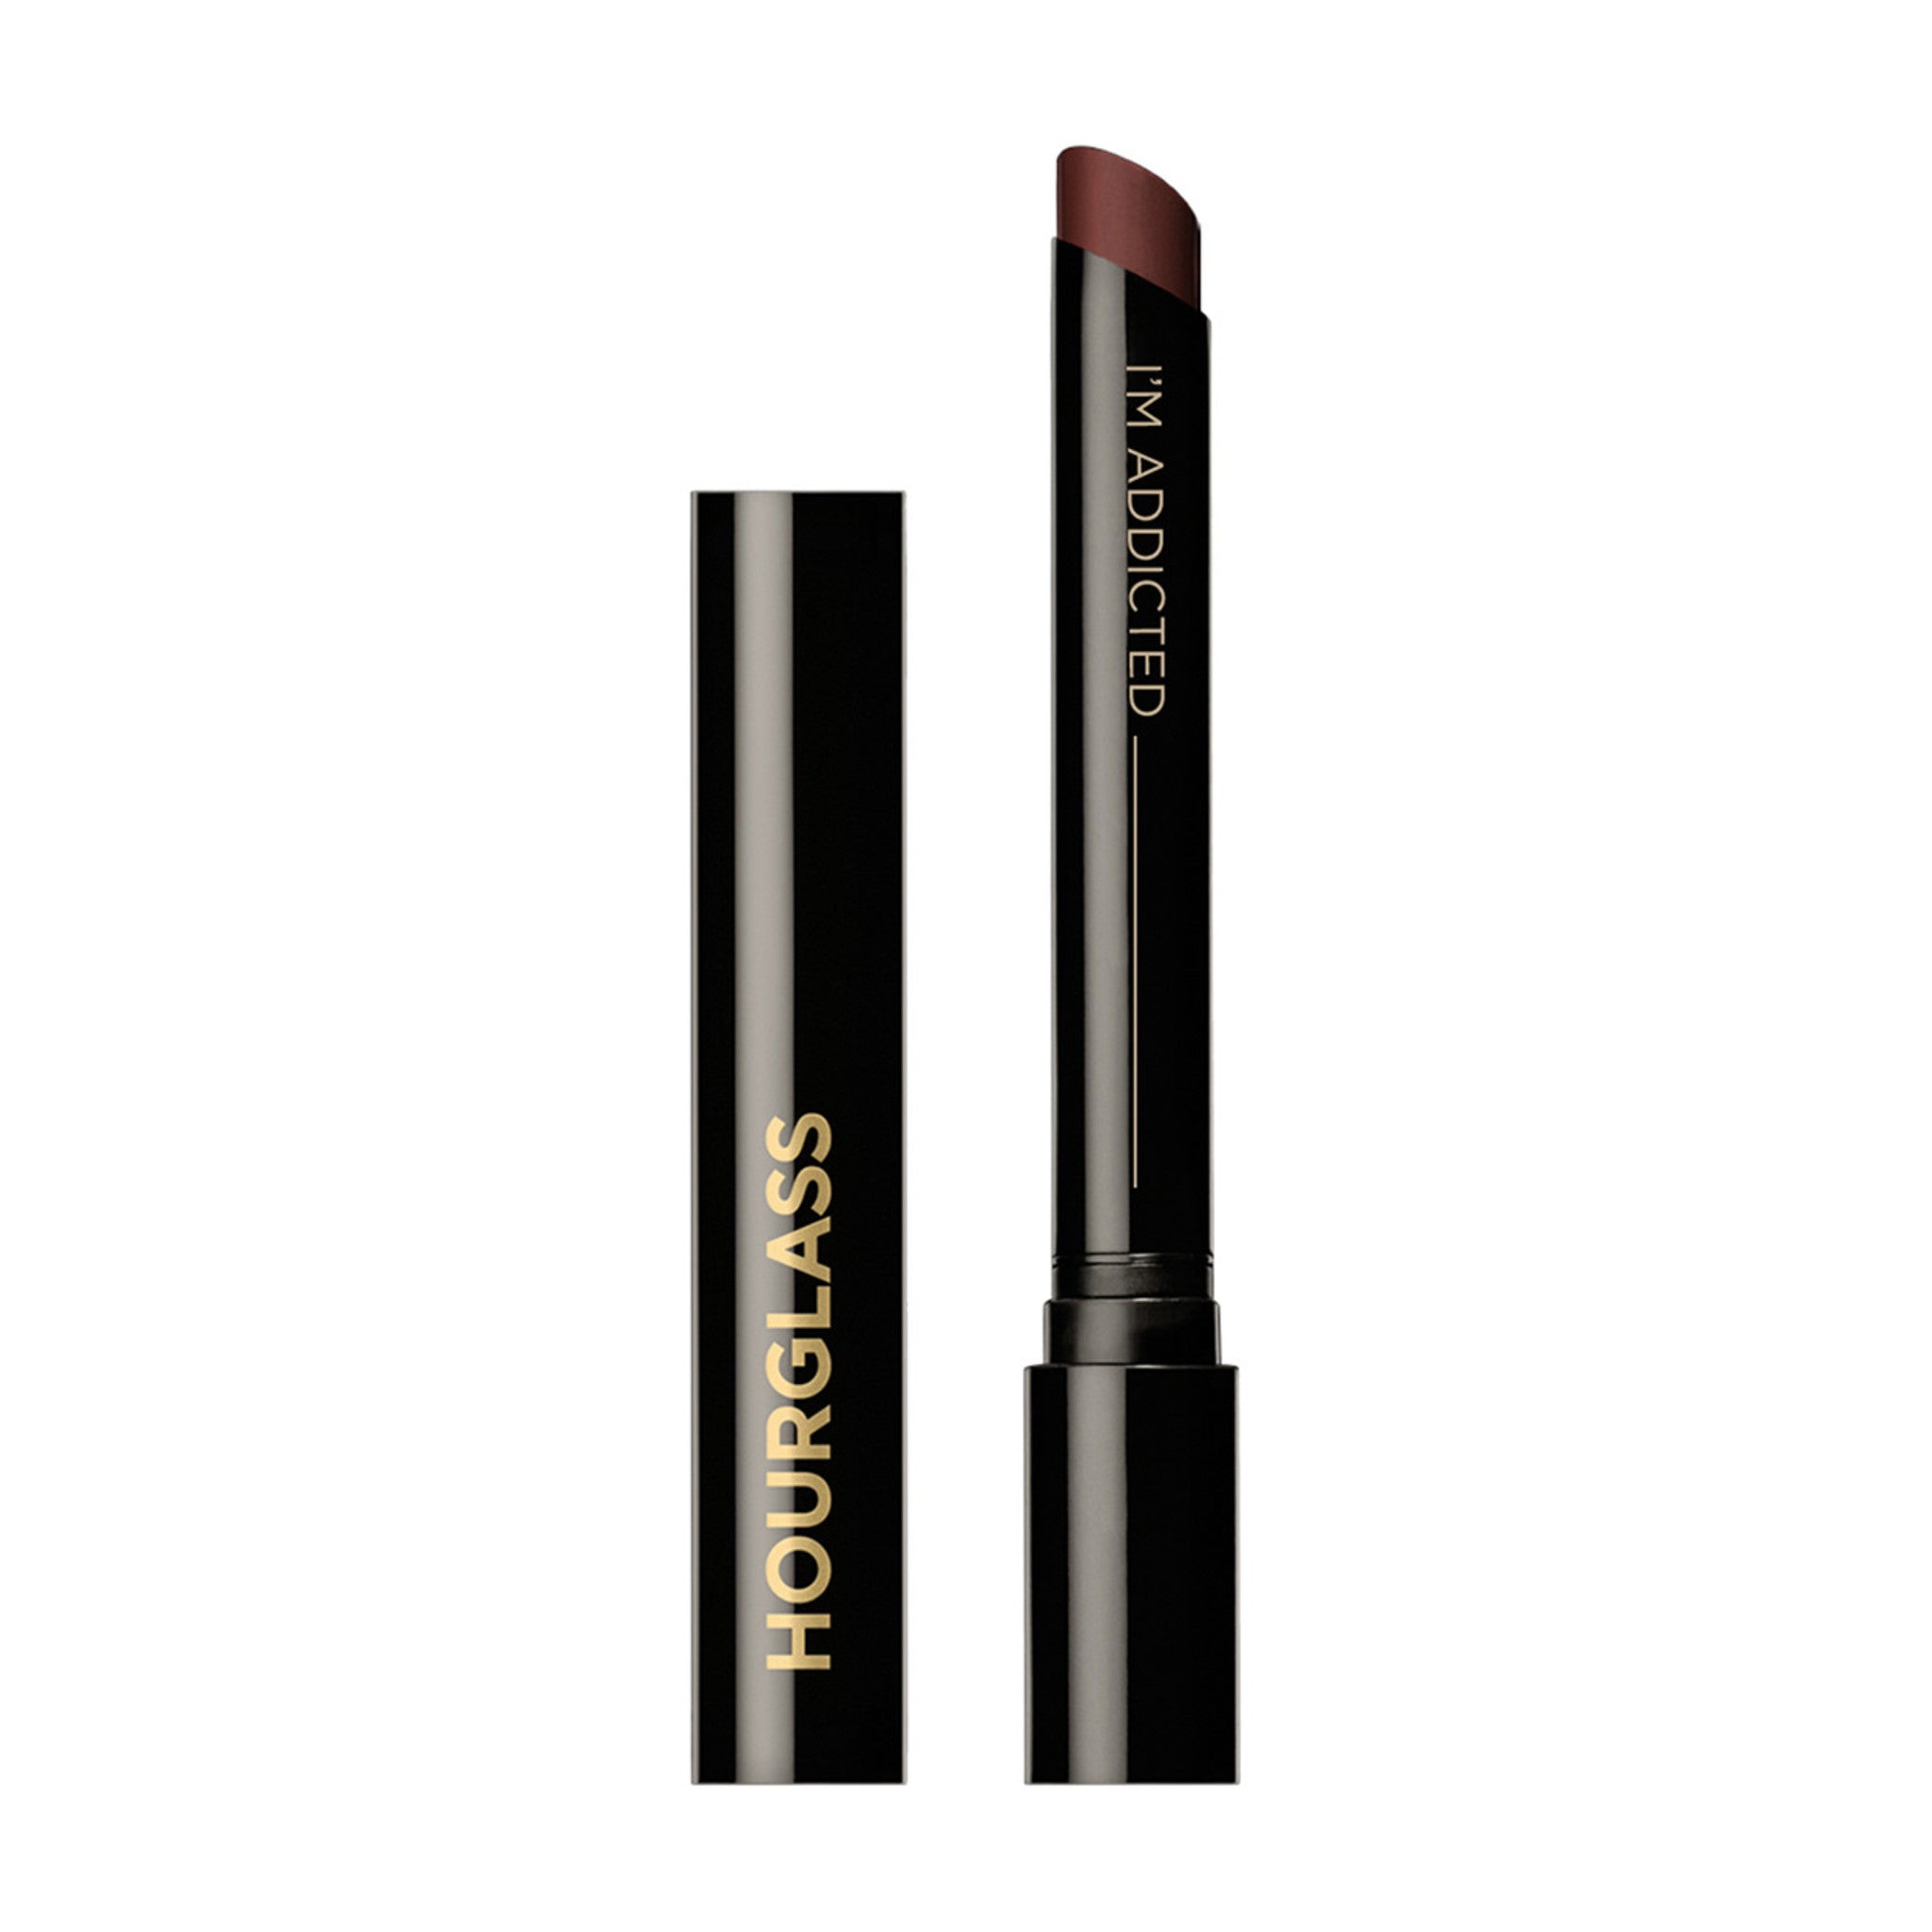 Hourglass Confession Ultra Slim High Intensity Lipstick Refill Color/Shade variant: I'M ADDICTED main image. This product is in the color pink